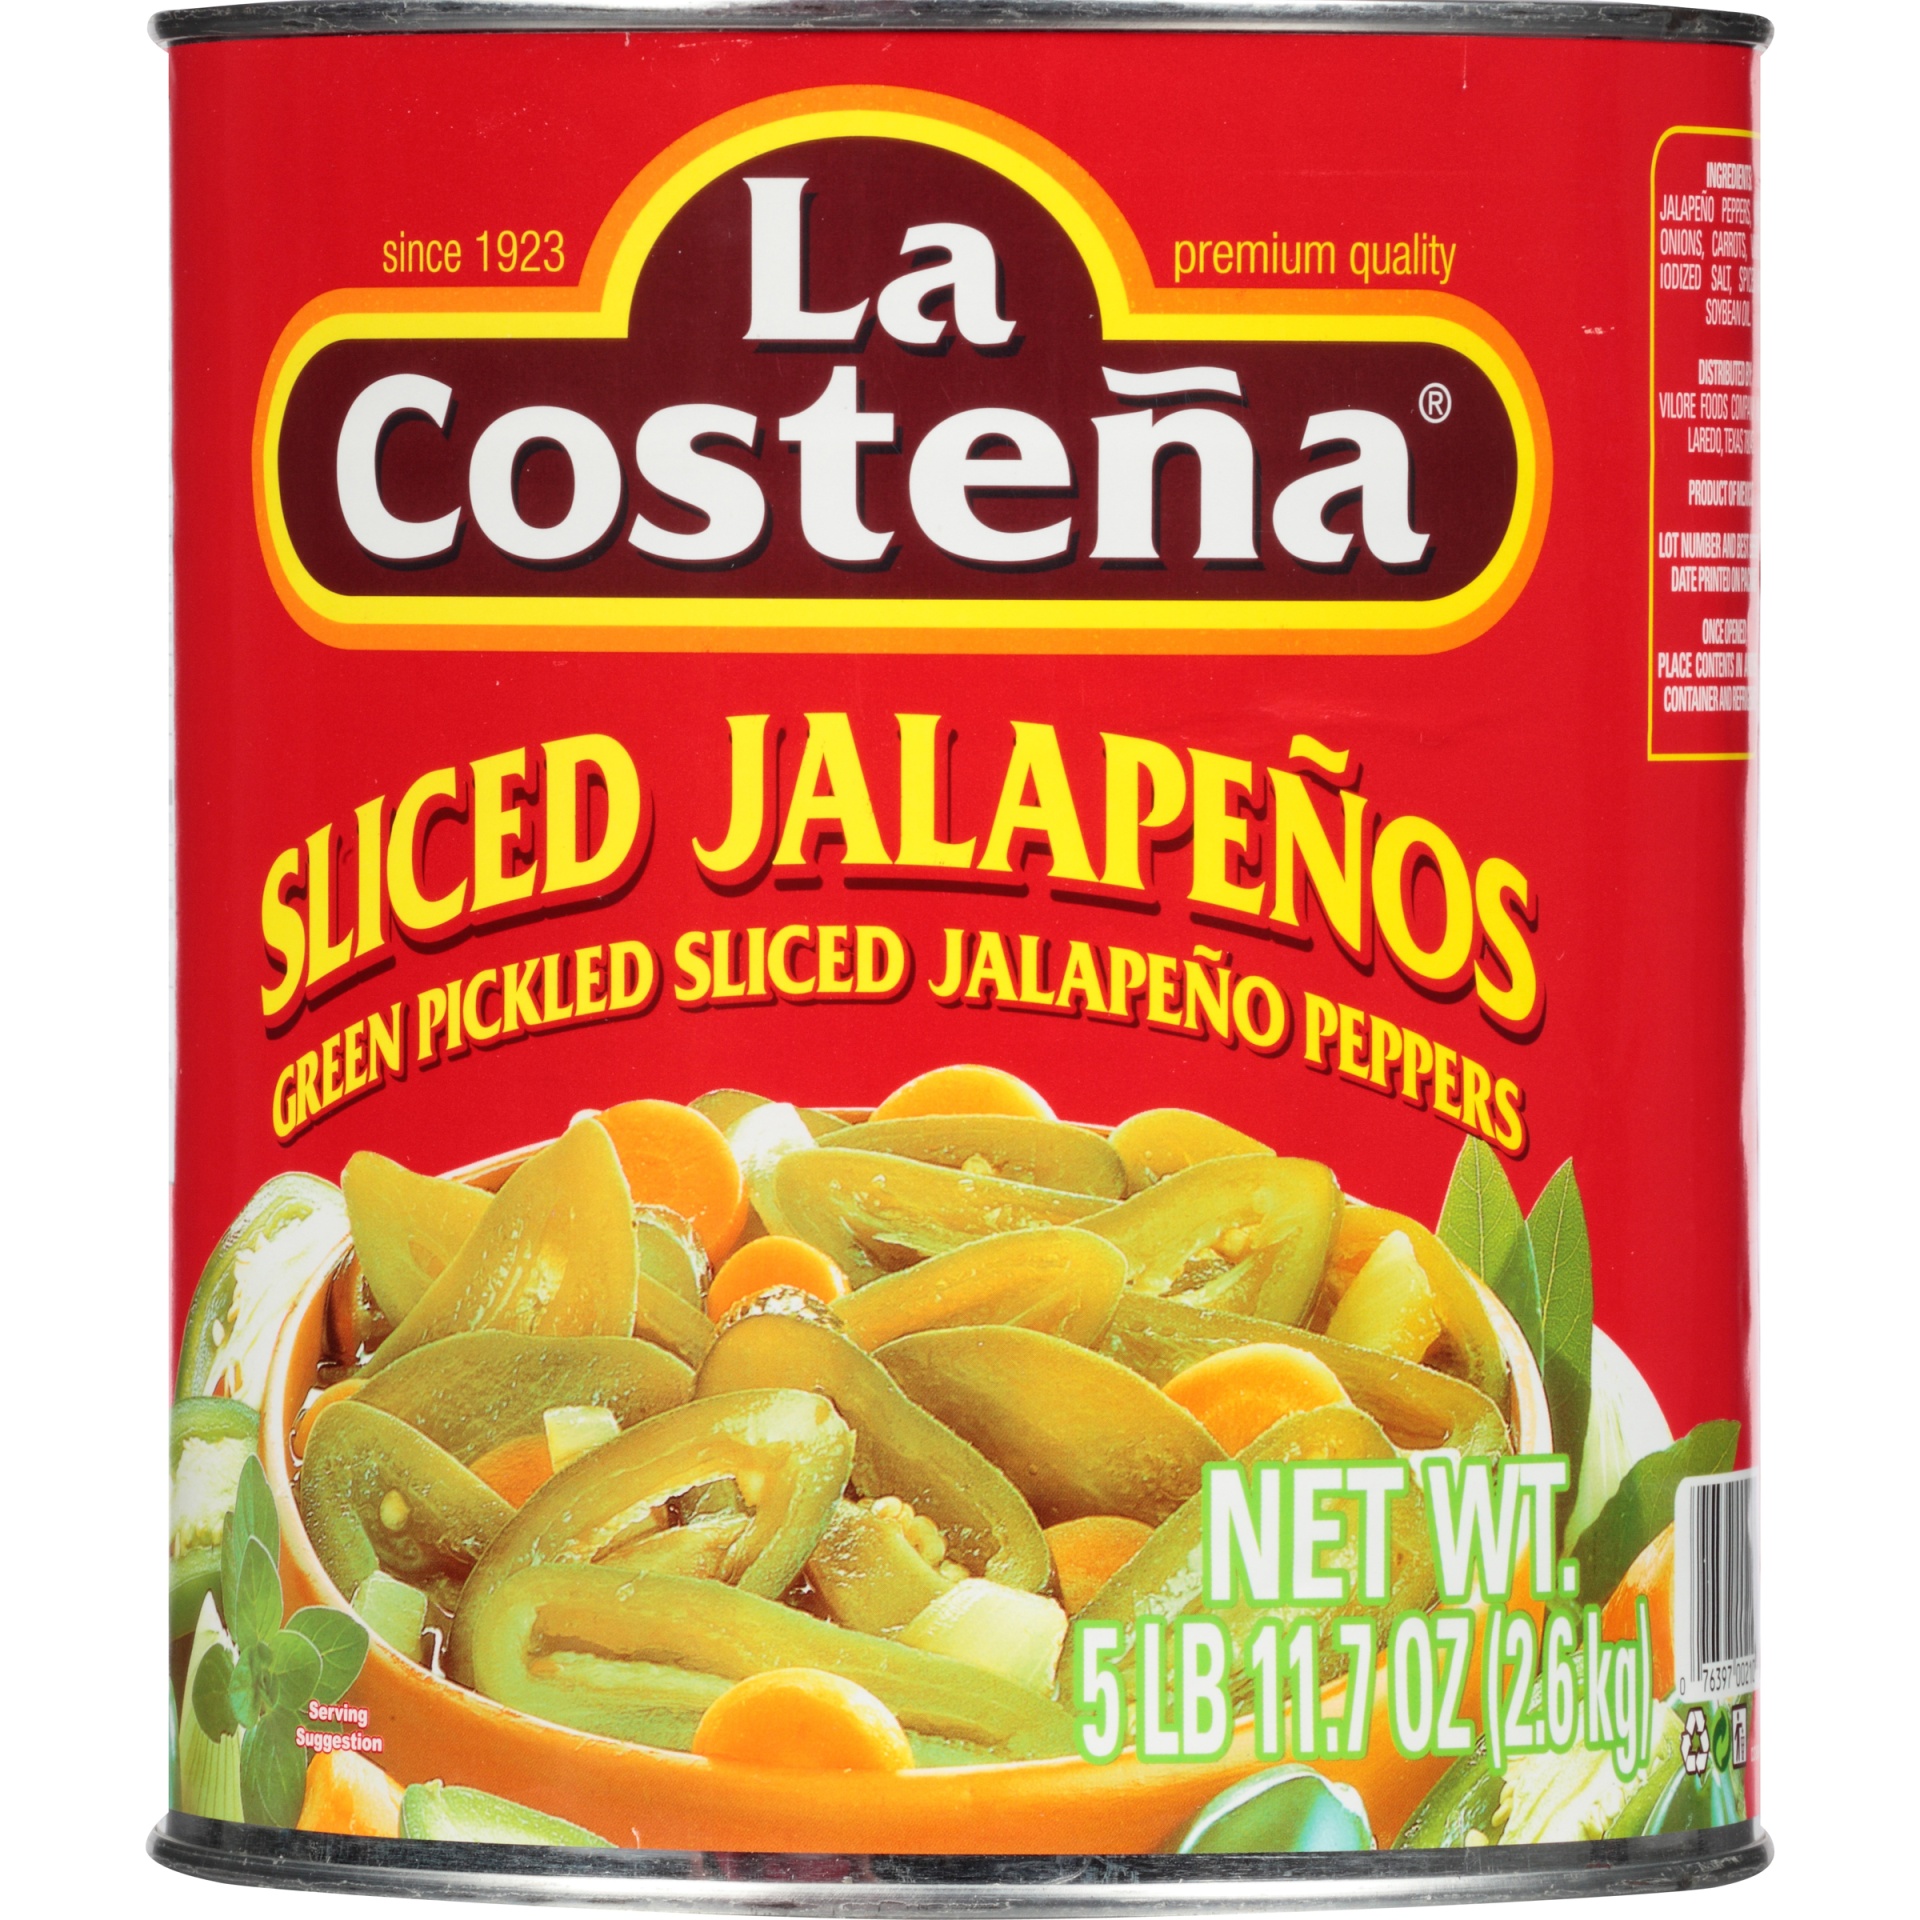 slide 4 of 6, La Costeña Green Pickled Sliced Jalapeno Peppers 60 oz. Cans, 6 ct; 10 oz